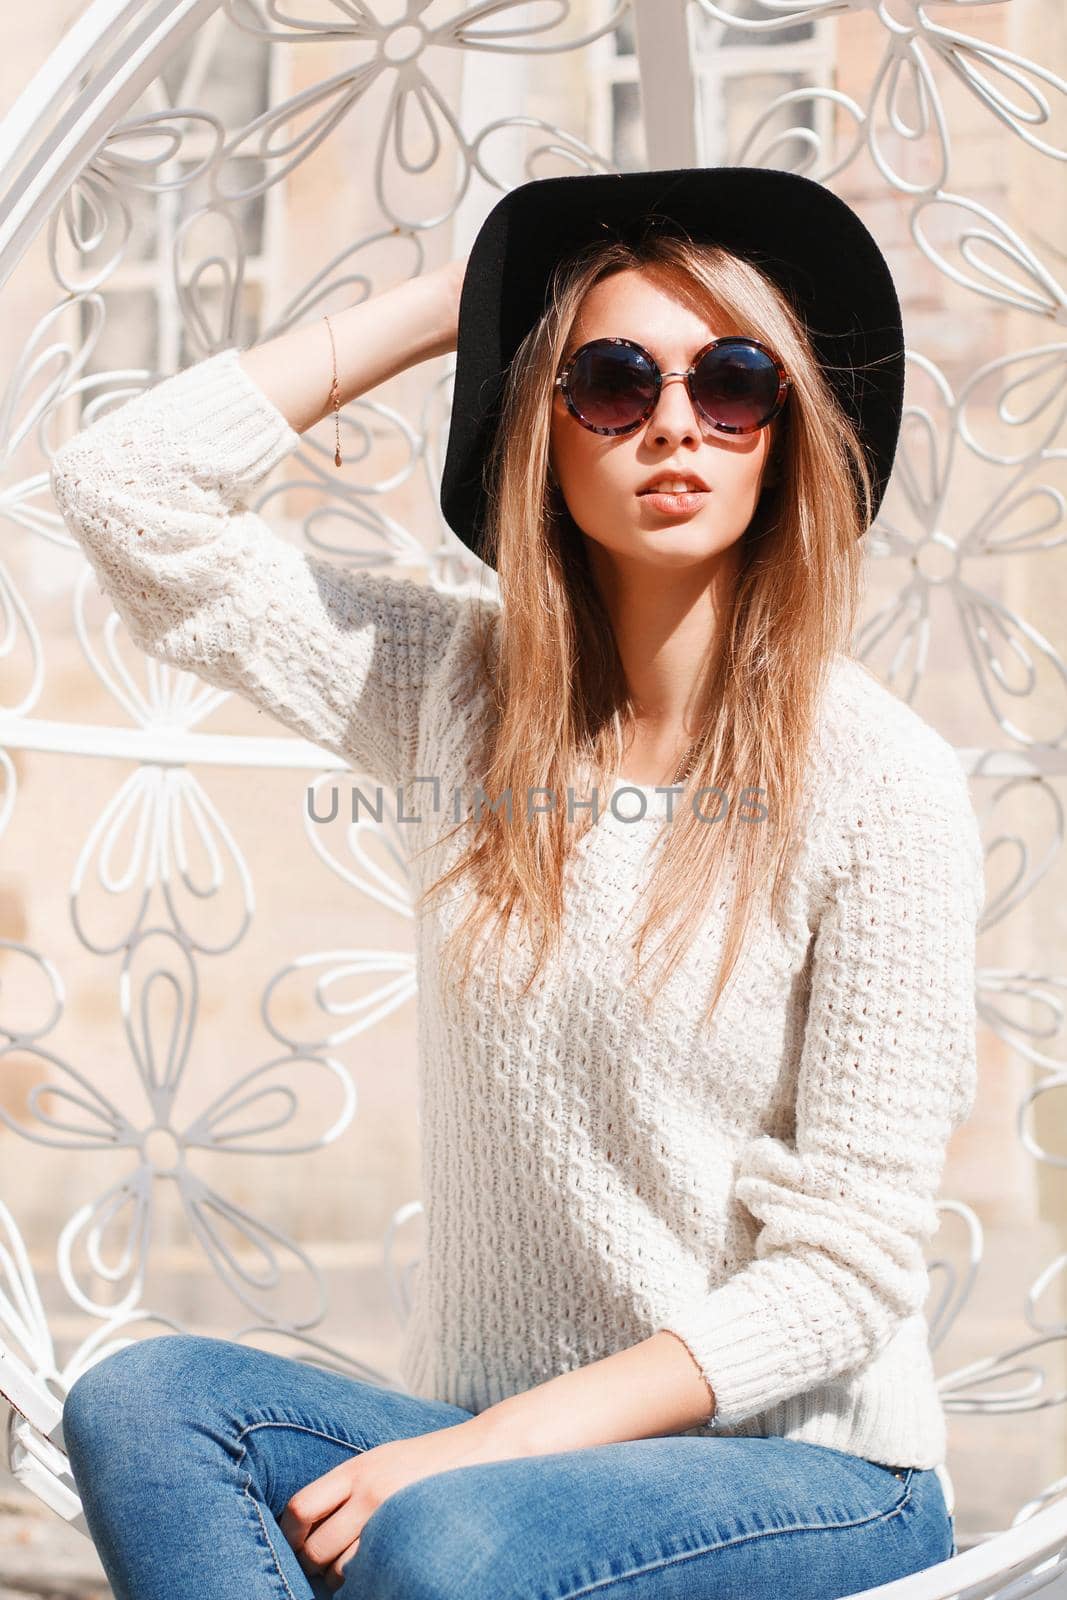 Pretty woman in a hat and sunglasses resting on a sunny day in a white suspended chair by alones